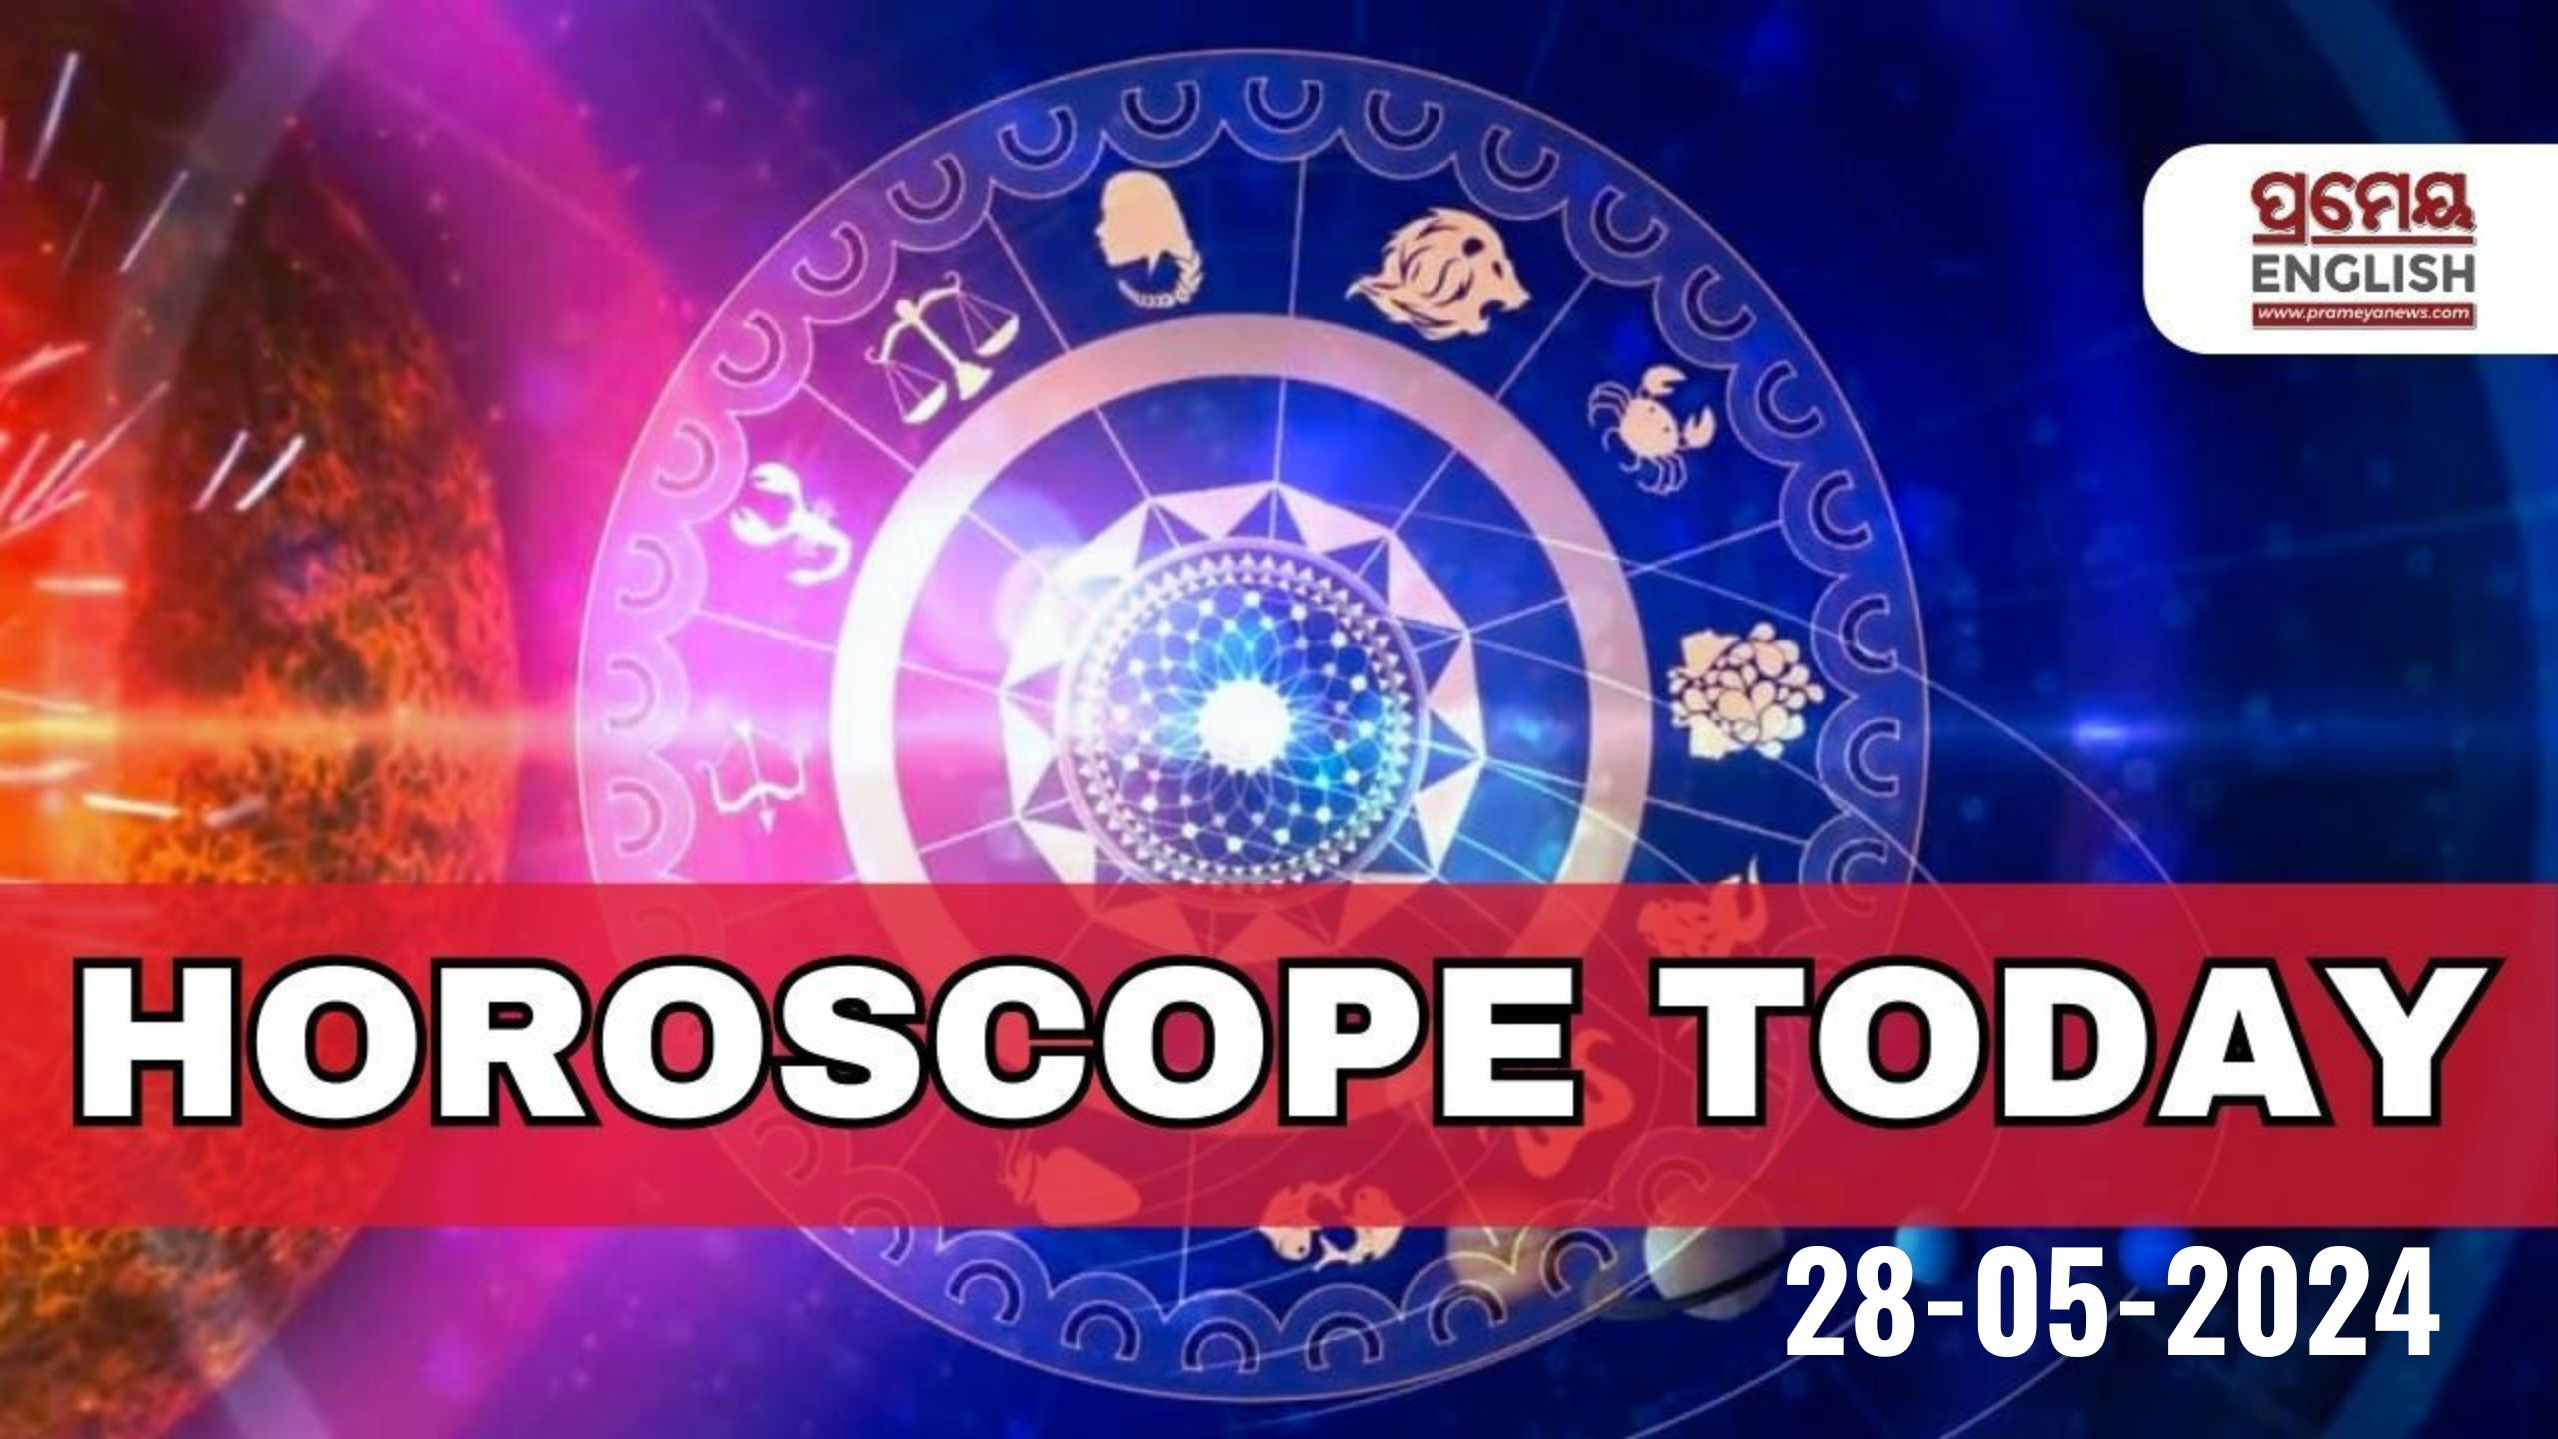 Horoscope Today: Astrological prediction for May 28, 2024